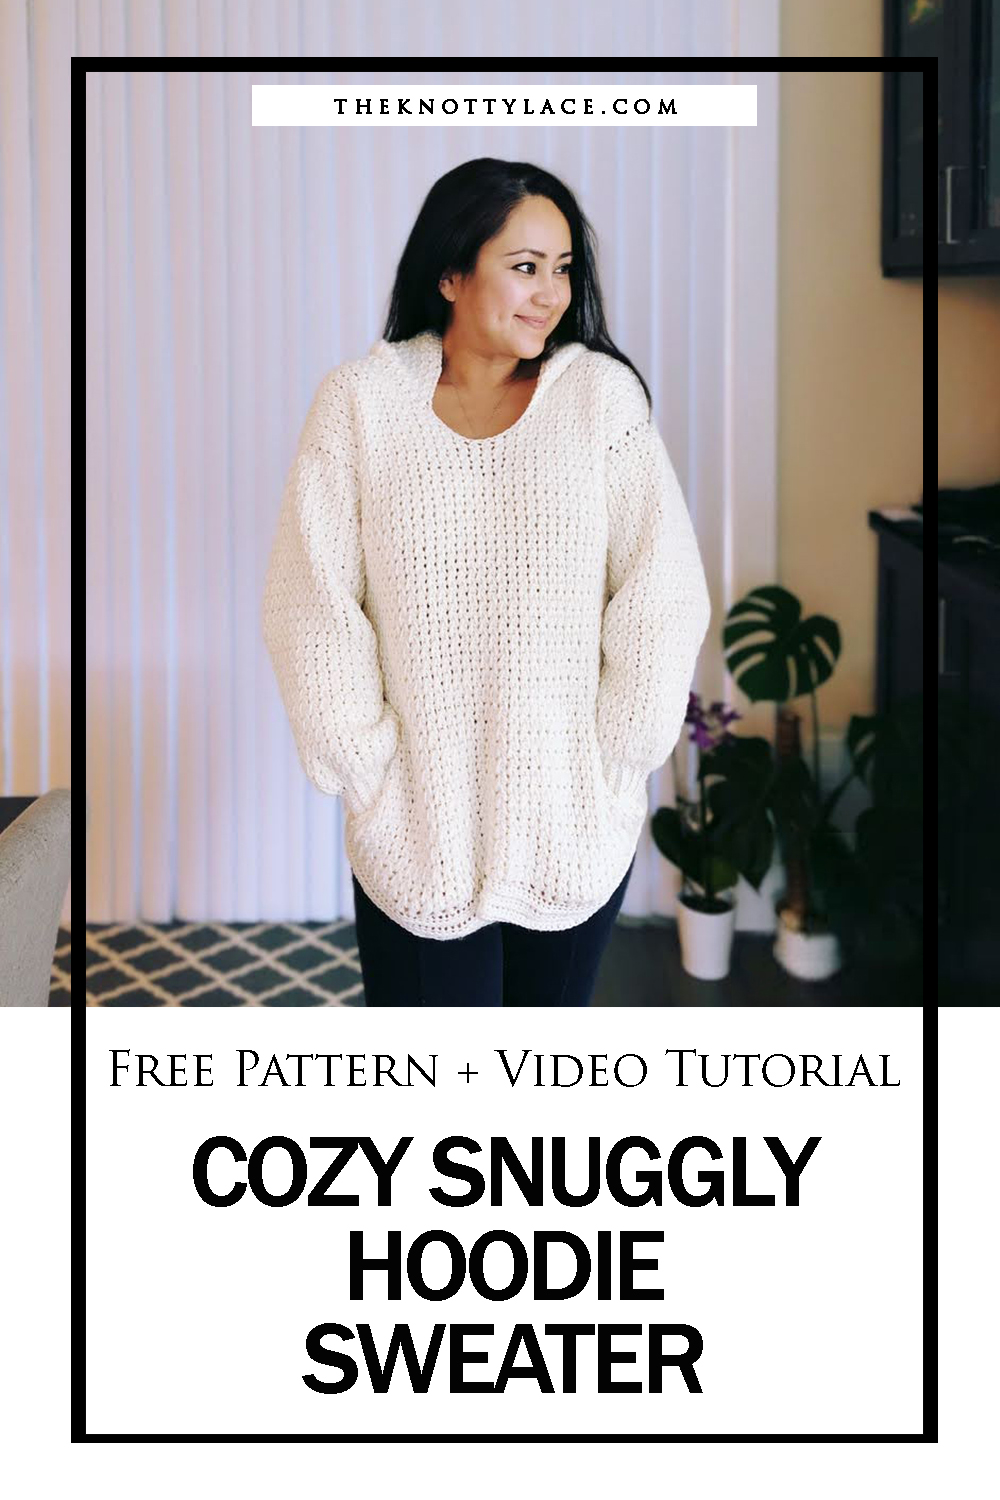 cozy snuggly hoodie sweater free pattern and video